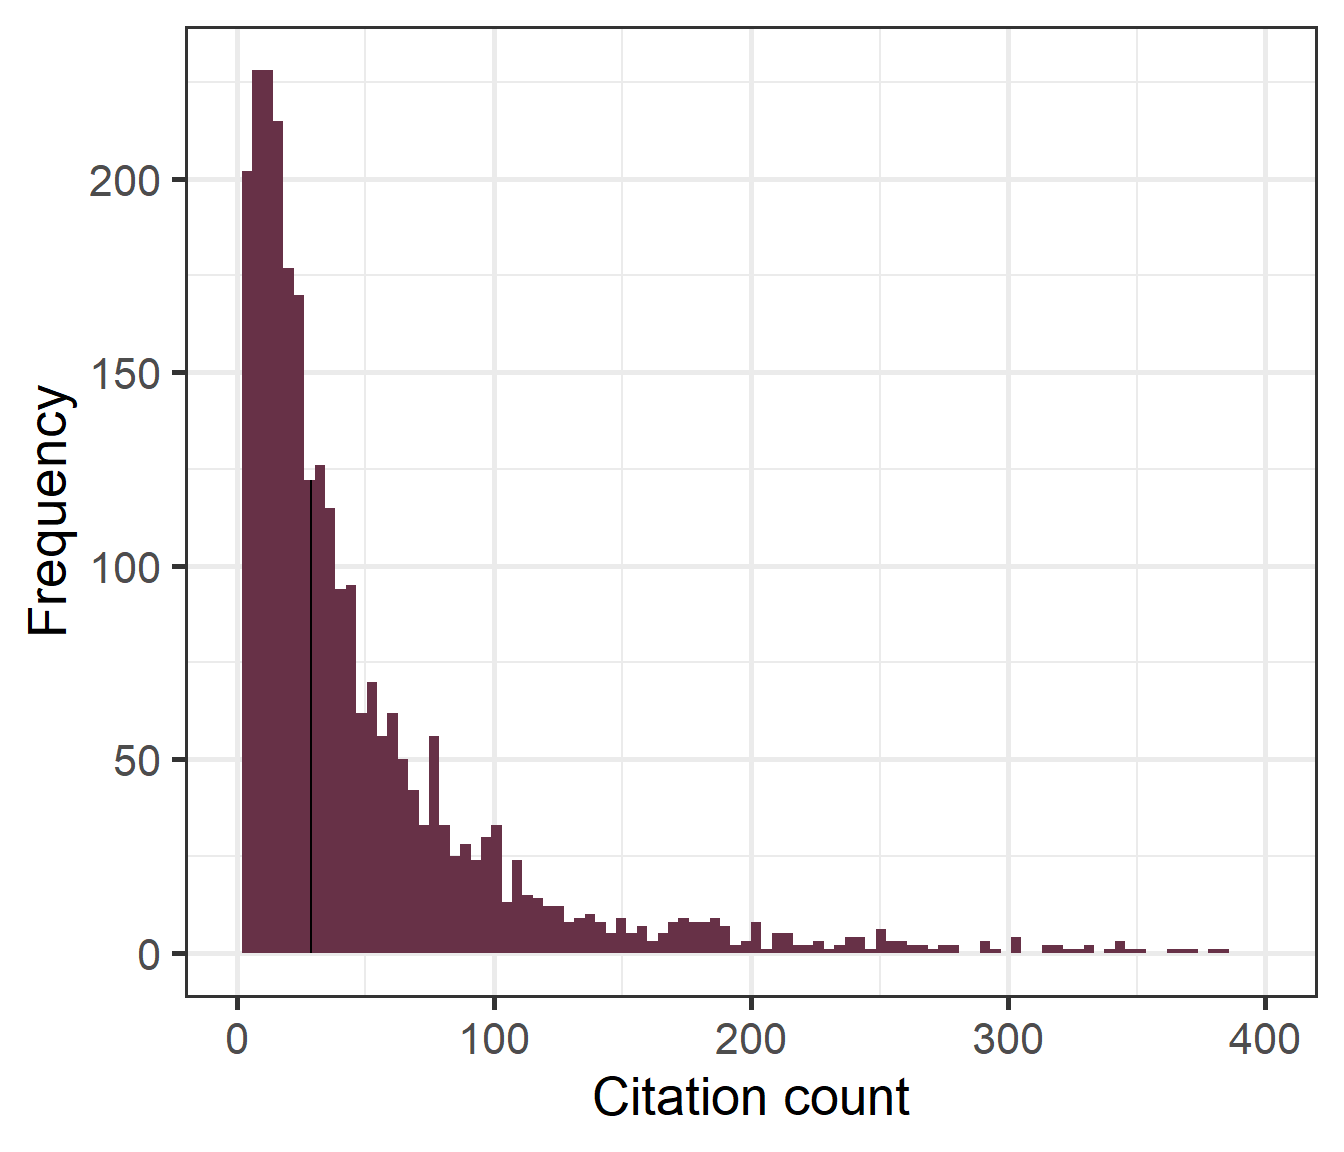 Histogram of Crossref citation counts for 2854 empirical research papers from the psychological literature. The black vertical line represents the median of the distribution. 1.7% of papers were cited more than 400 times. For visual purposes, these are not displayed.